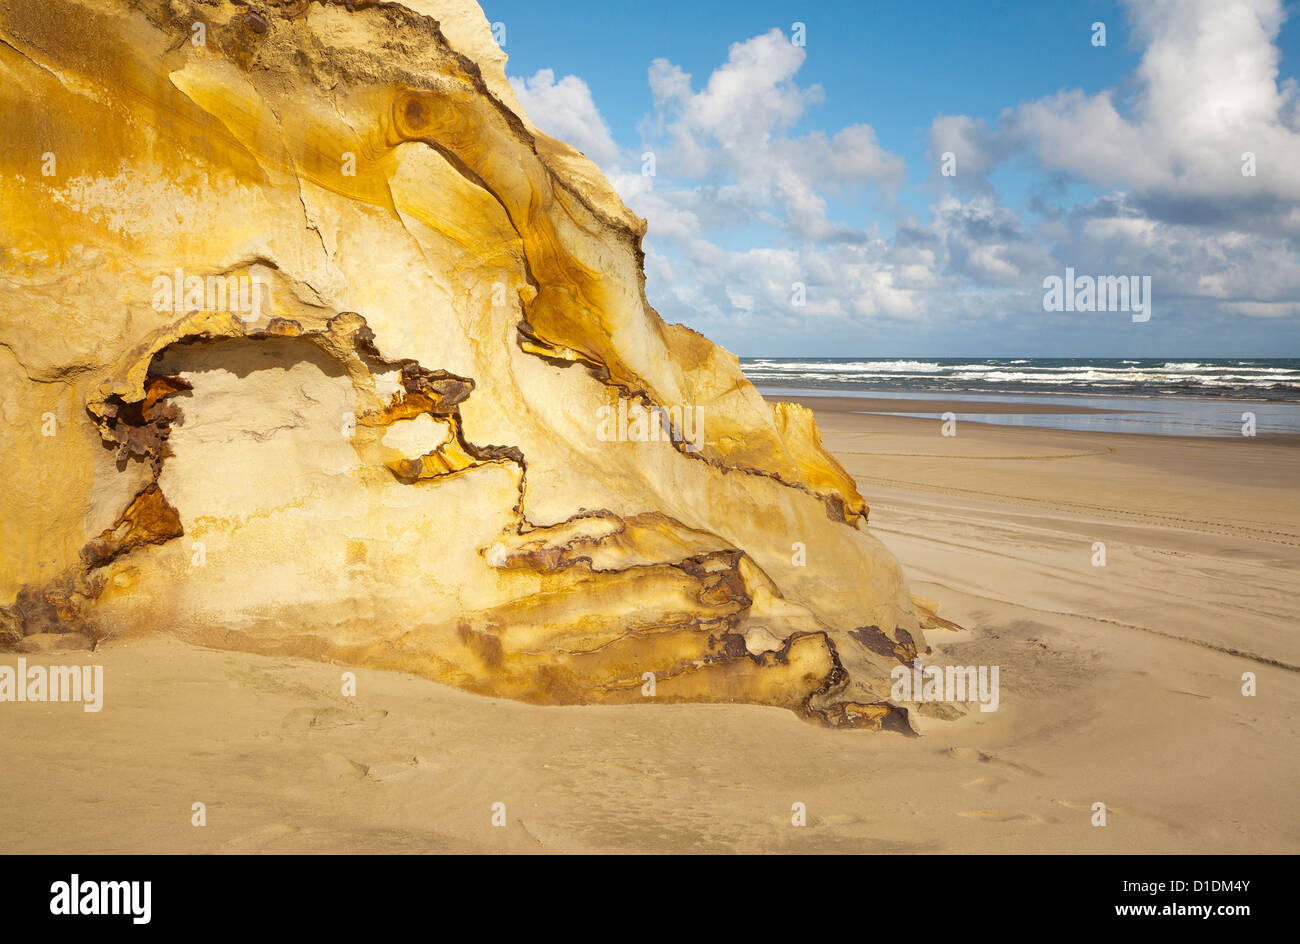 A view of sandstone rock formation on Baylys beach, Northland, North Island, New Zealand. Stock Photo